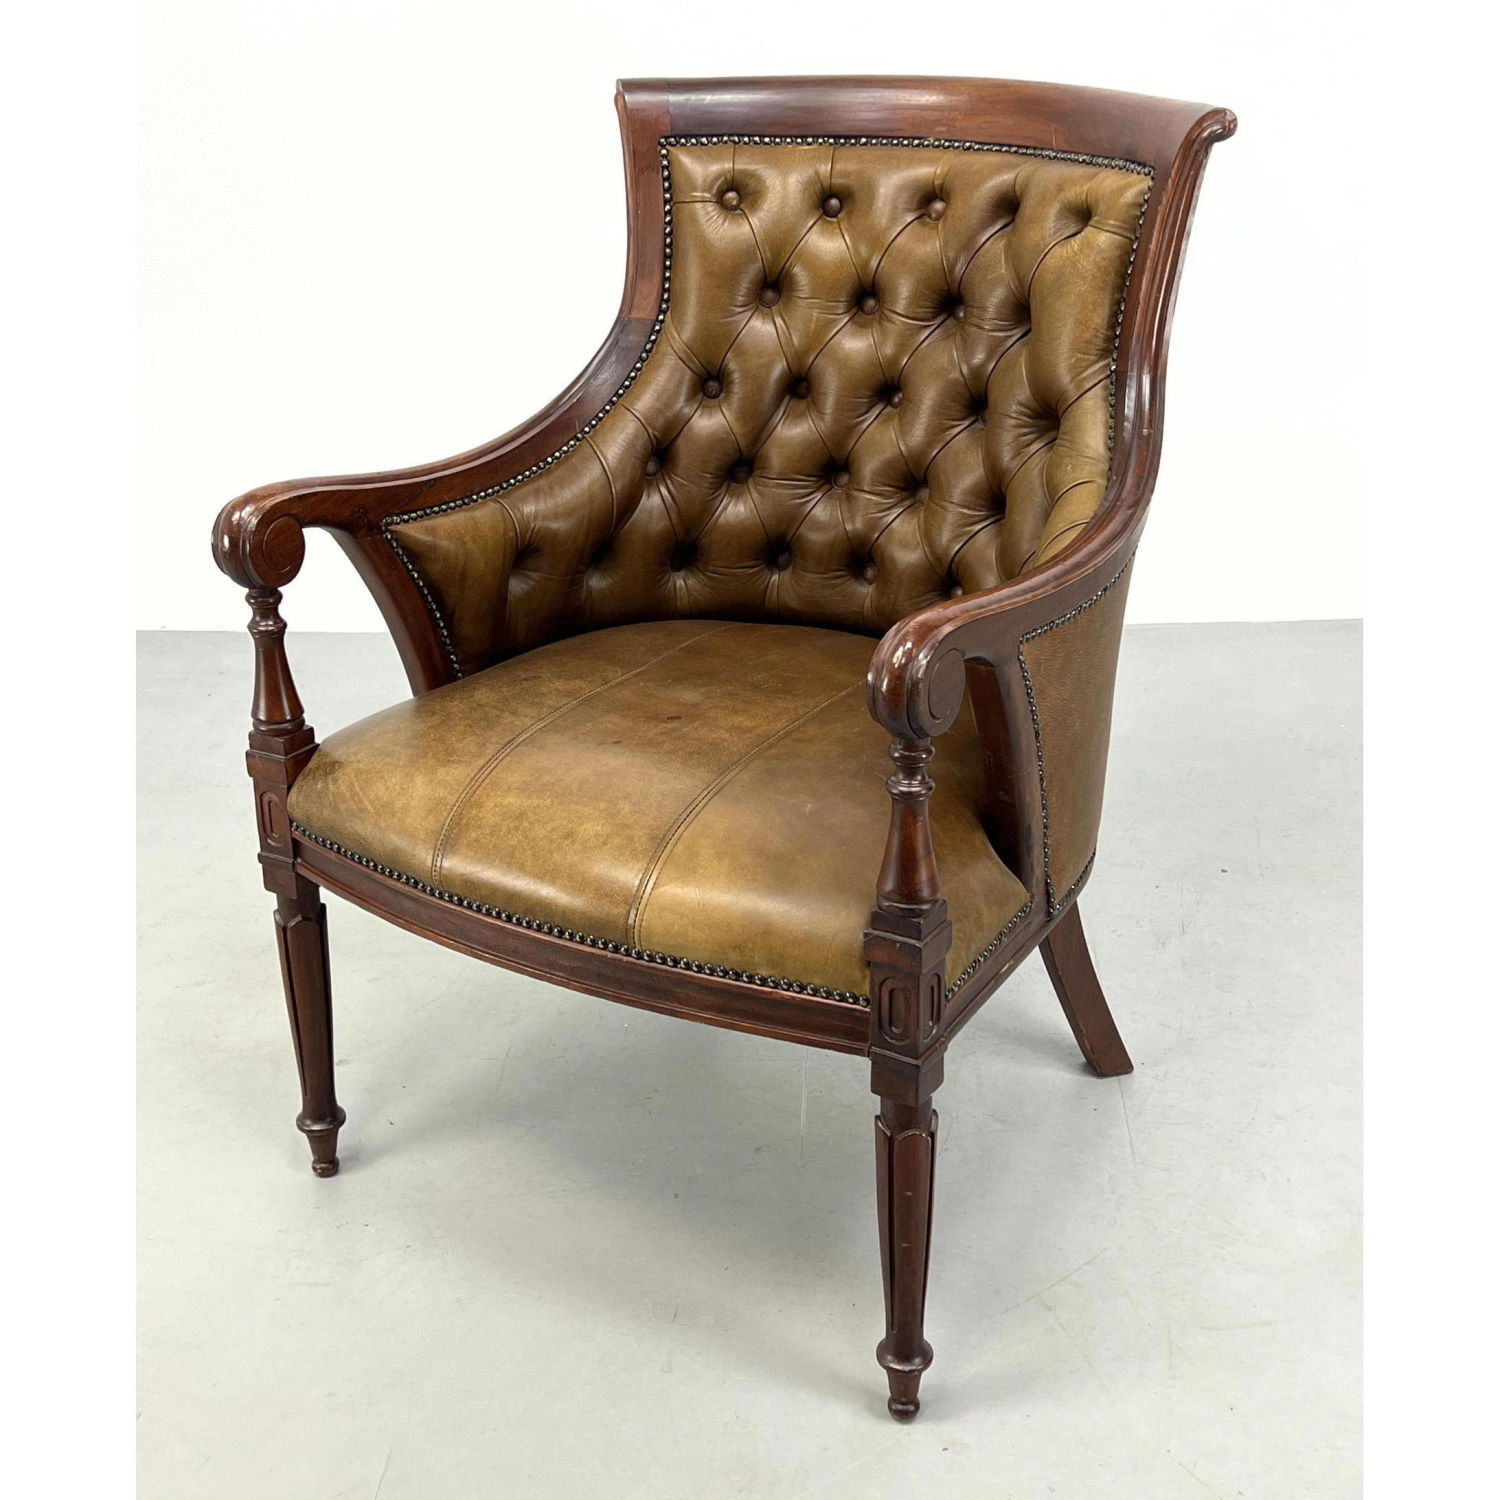 Tufted Leather Vintage Arm Chair.